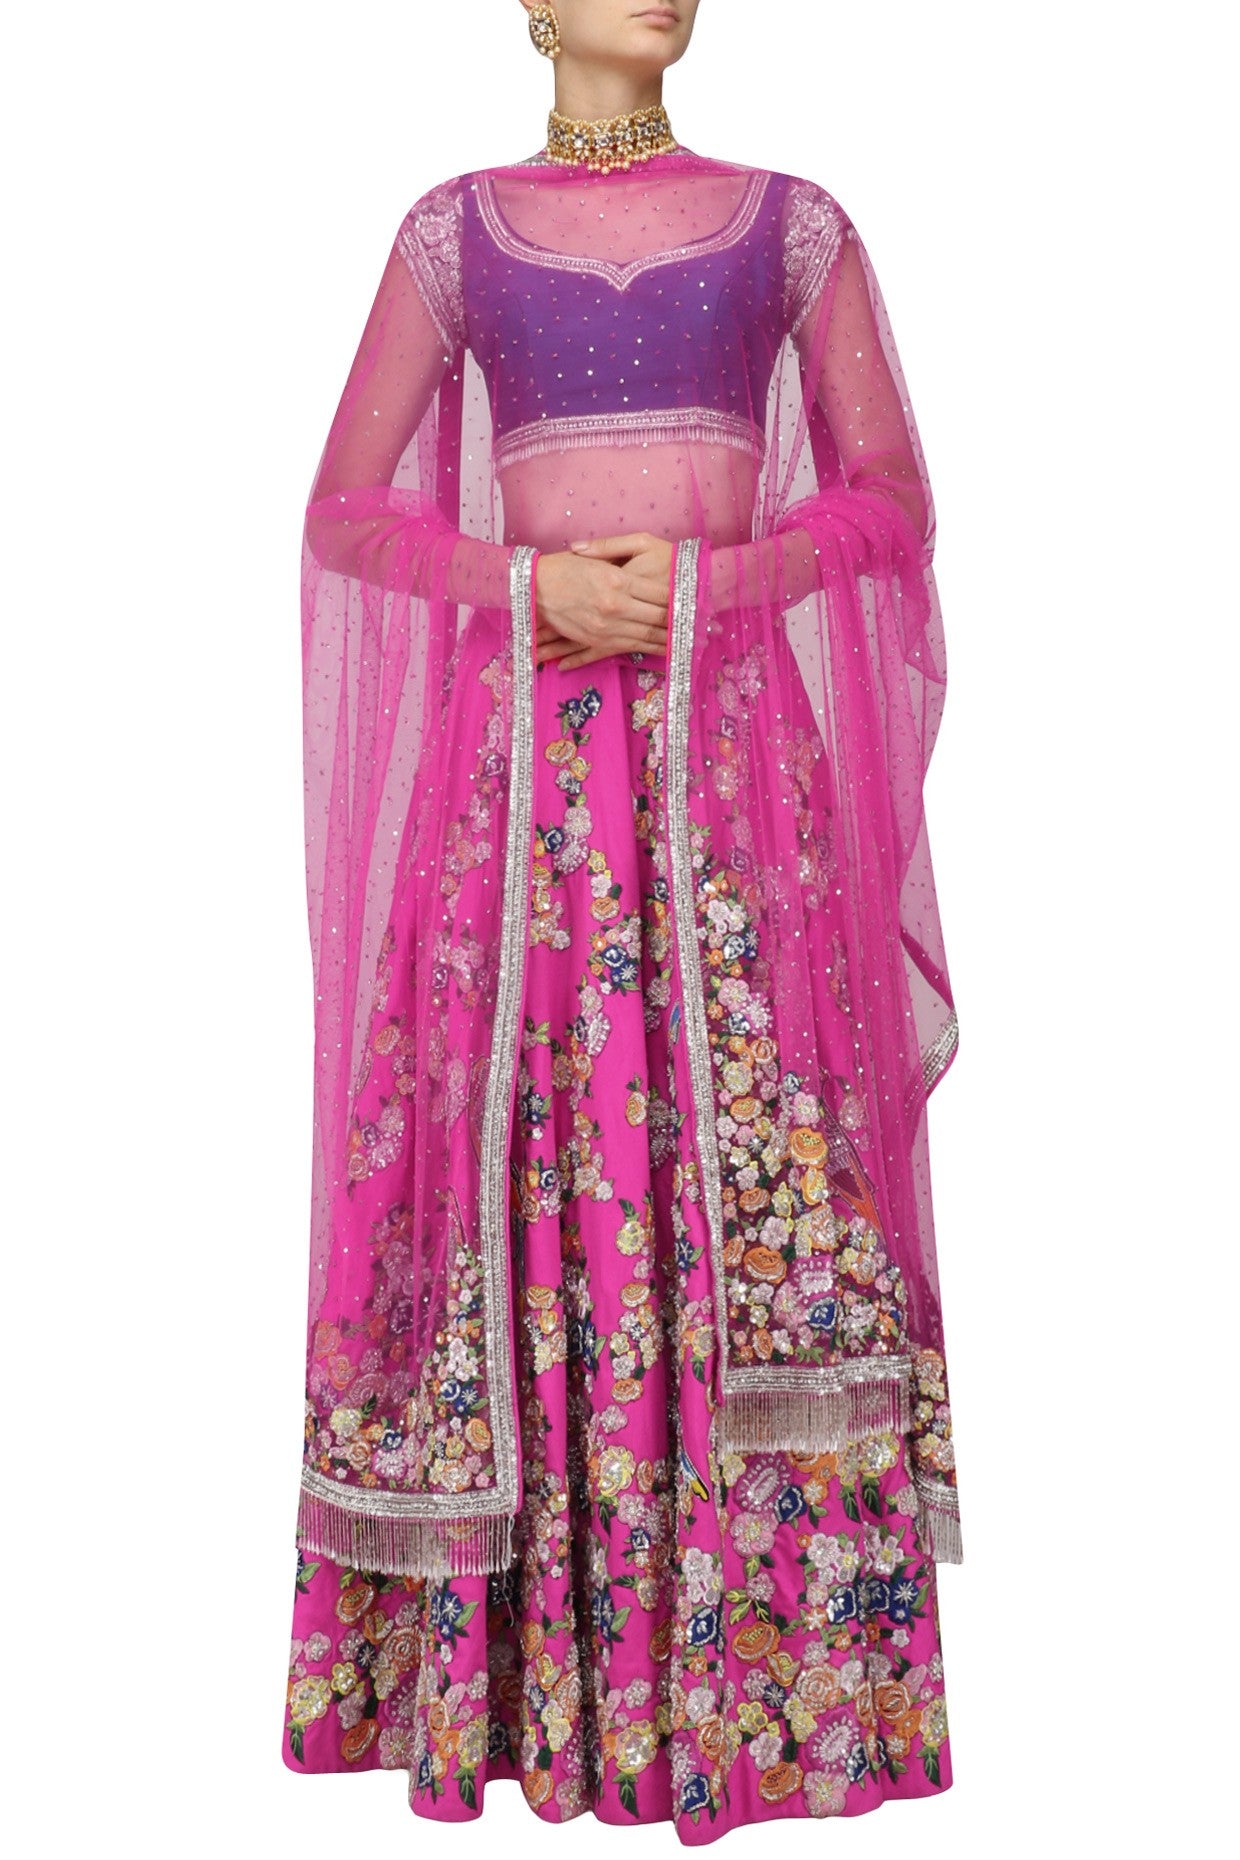 Dark Pink Color Lehenga With Blue Blouse